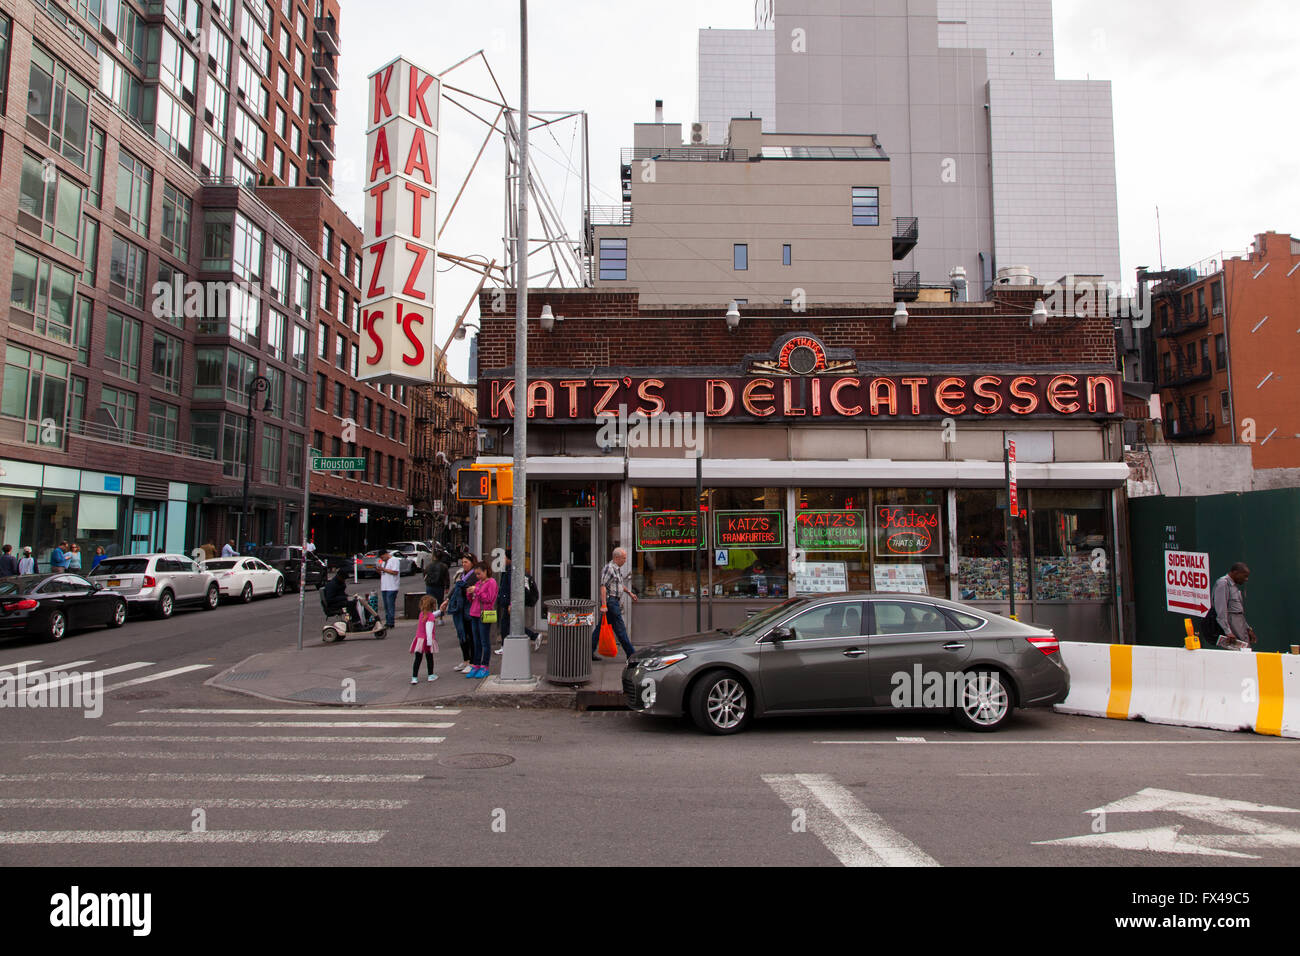 Katz's Deli, A Delicatessen diner on the Lower East Side, New York City,  United States of America Stock Photo - Alamy